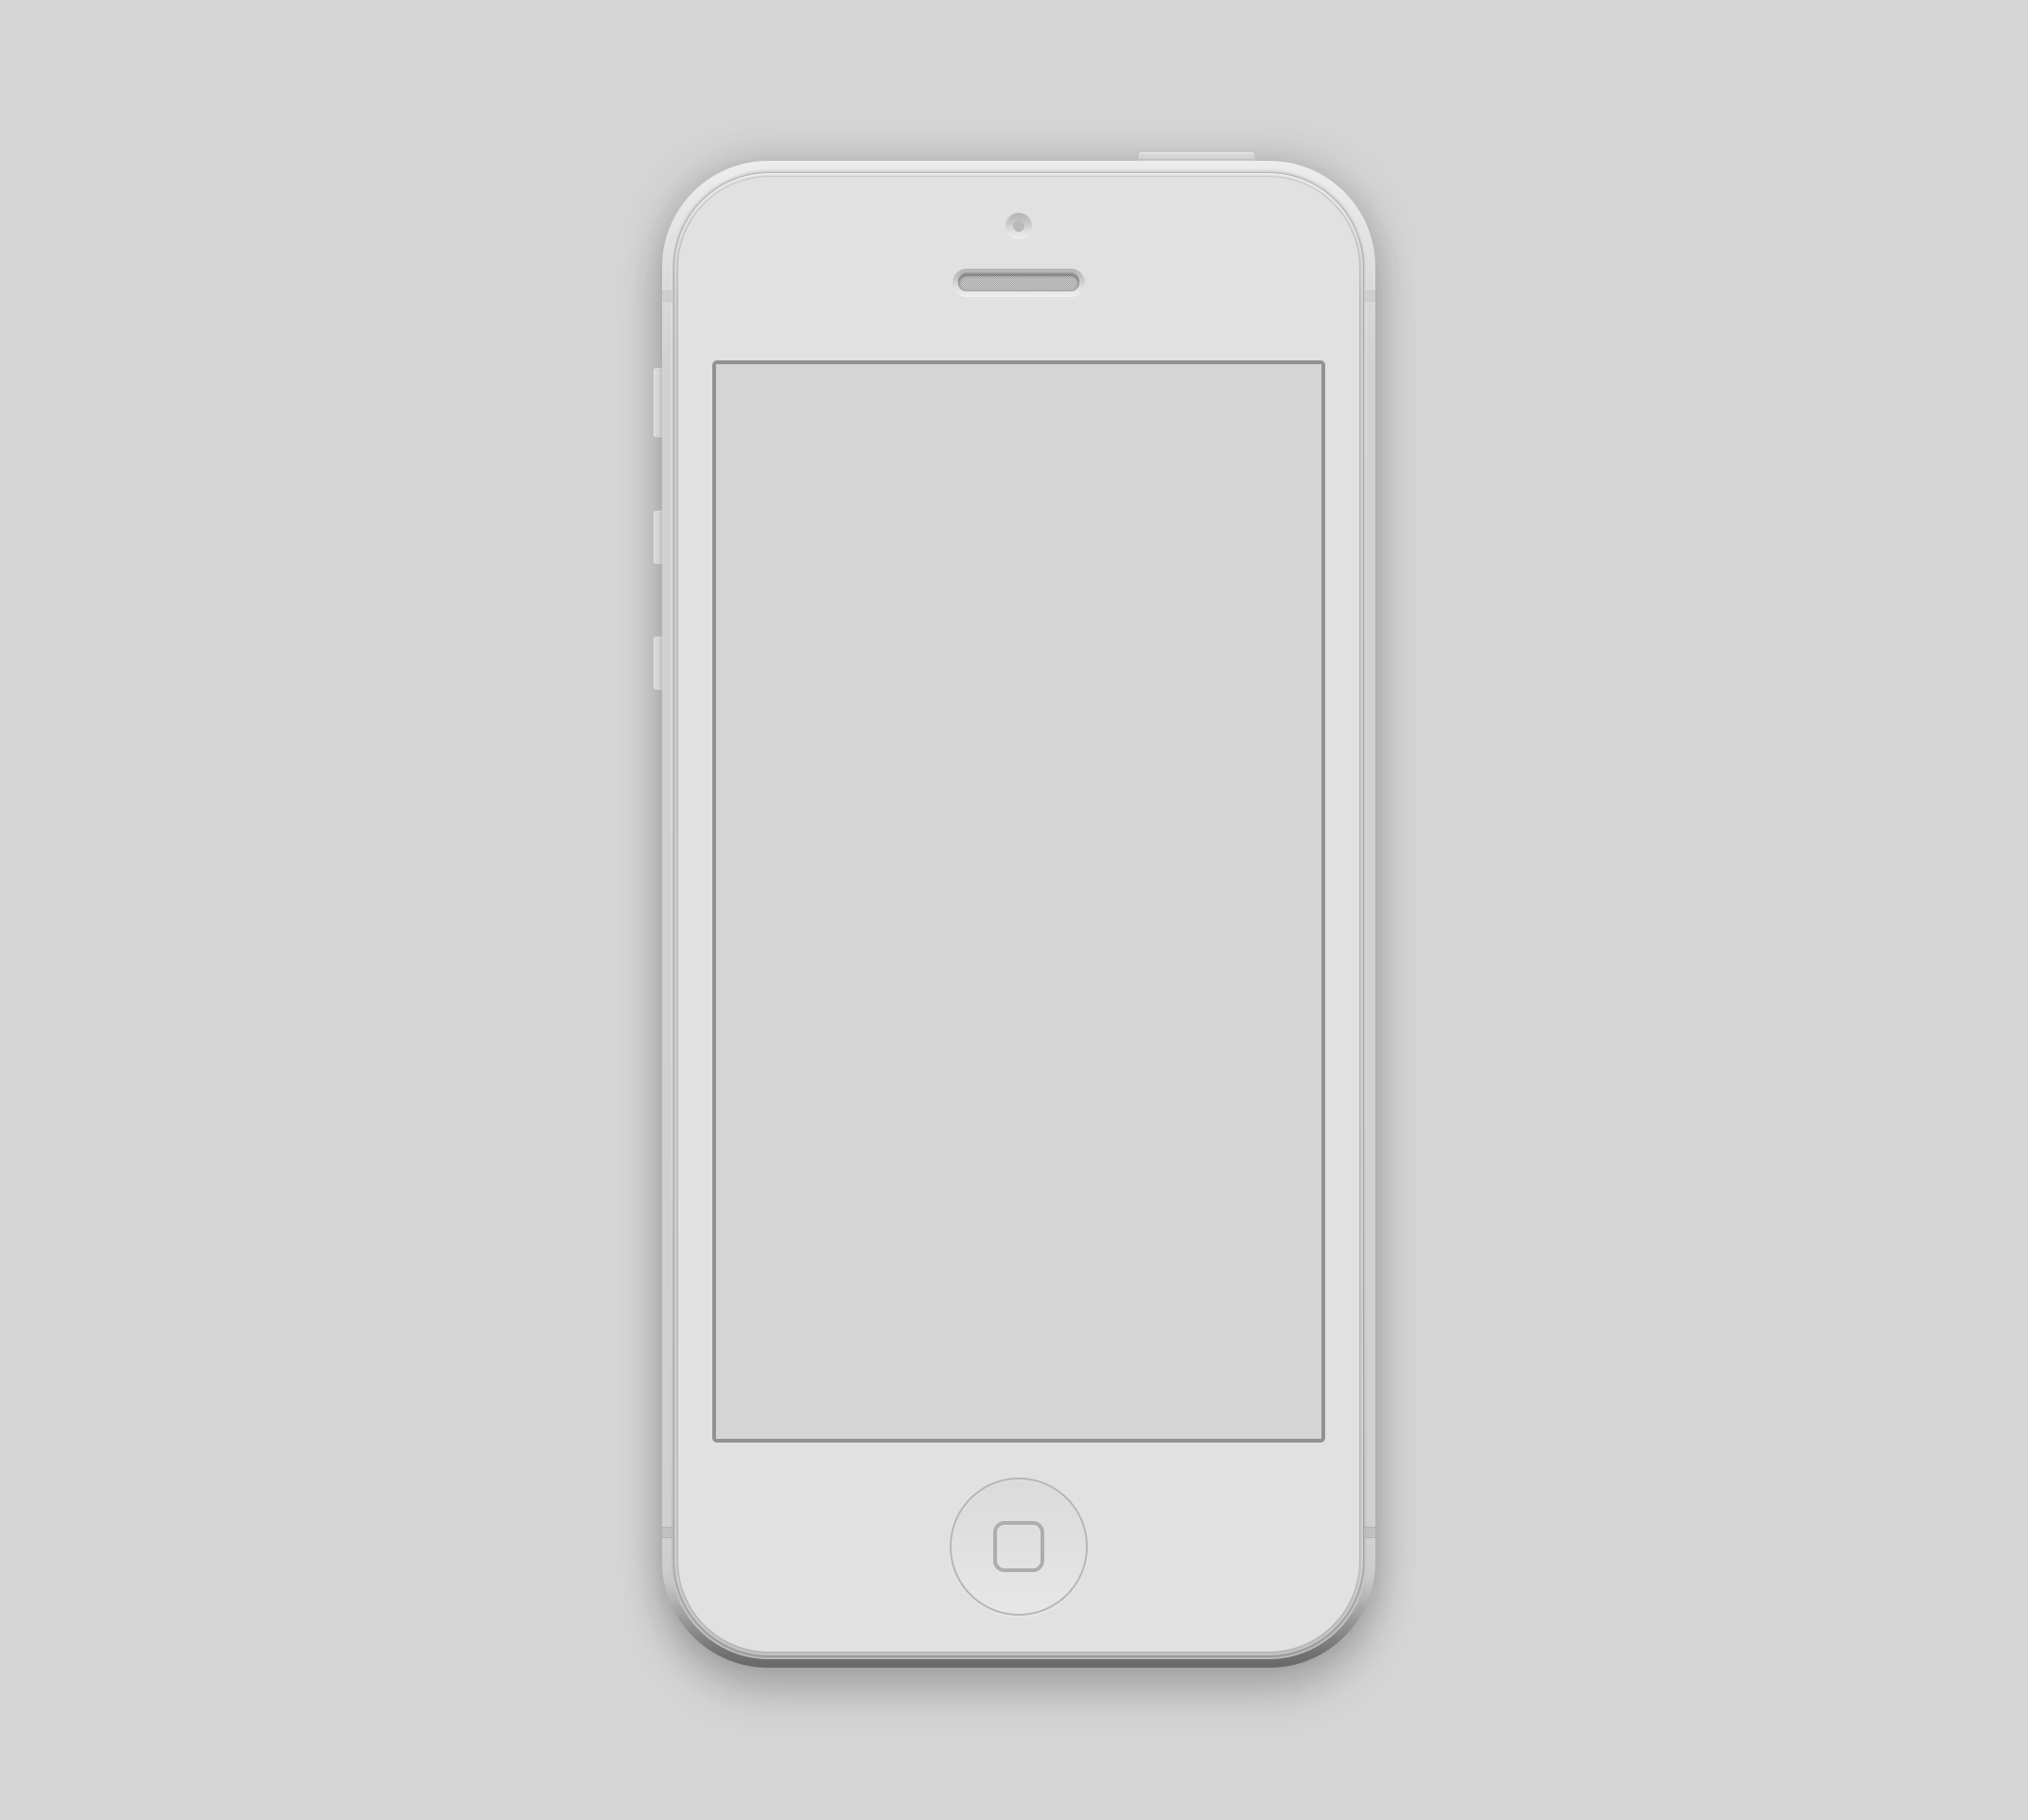 10 IPhone 5 Mockup Psd Free Images.